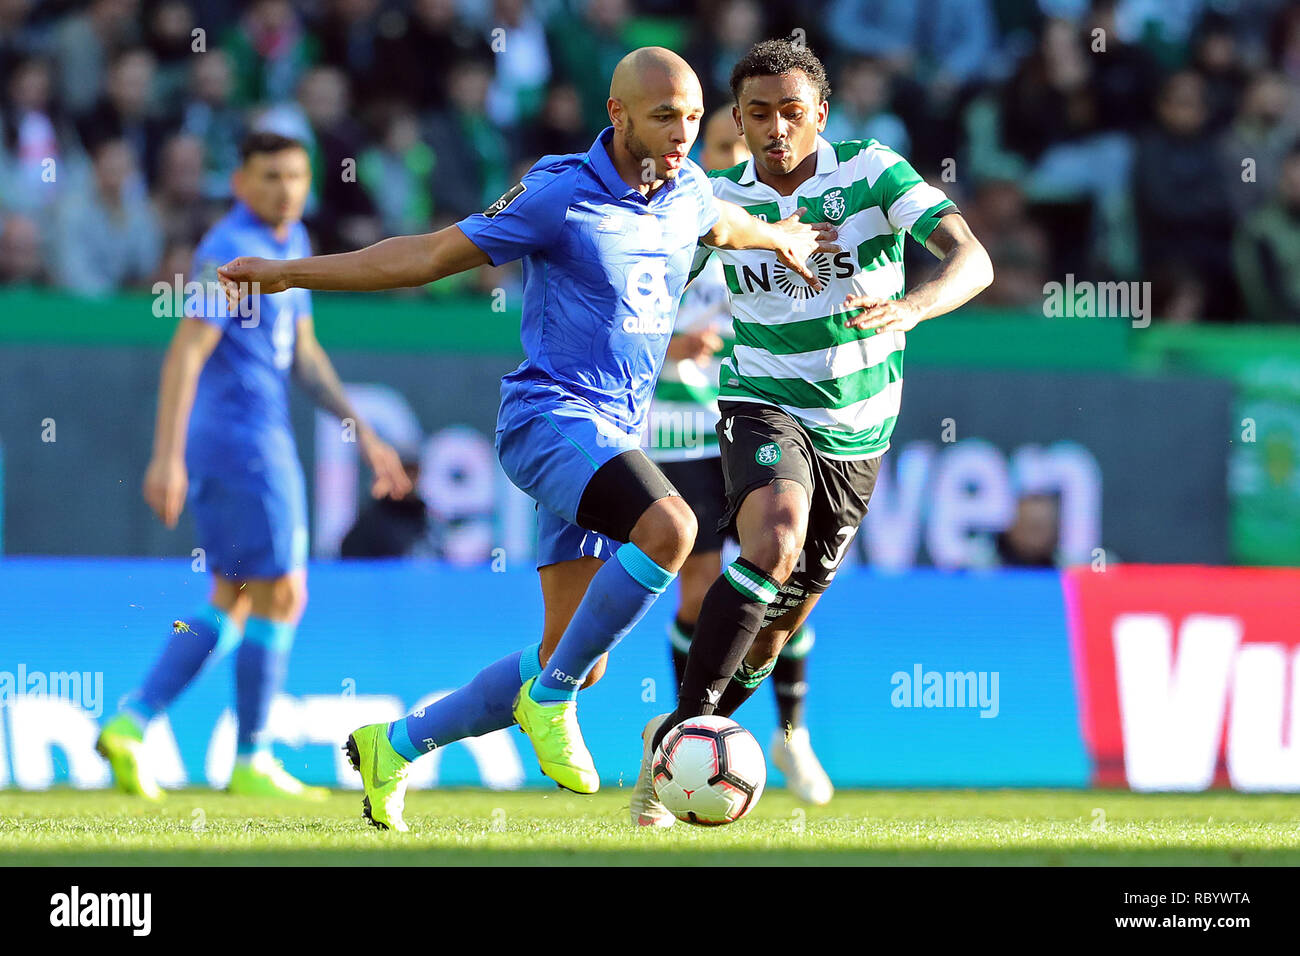 Yacine Brahimi of FC Porto (L) and Wendel of Sporting CP (R) are seen during the League NOS 2018/19 football match between Sporting CP vs FC Porto. (Final score: Sporting CP 0 - 0 FC Porto) Stock Photo